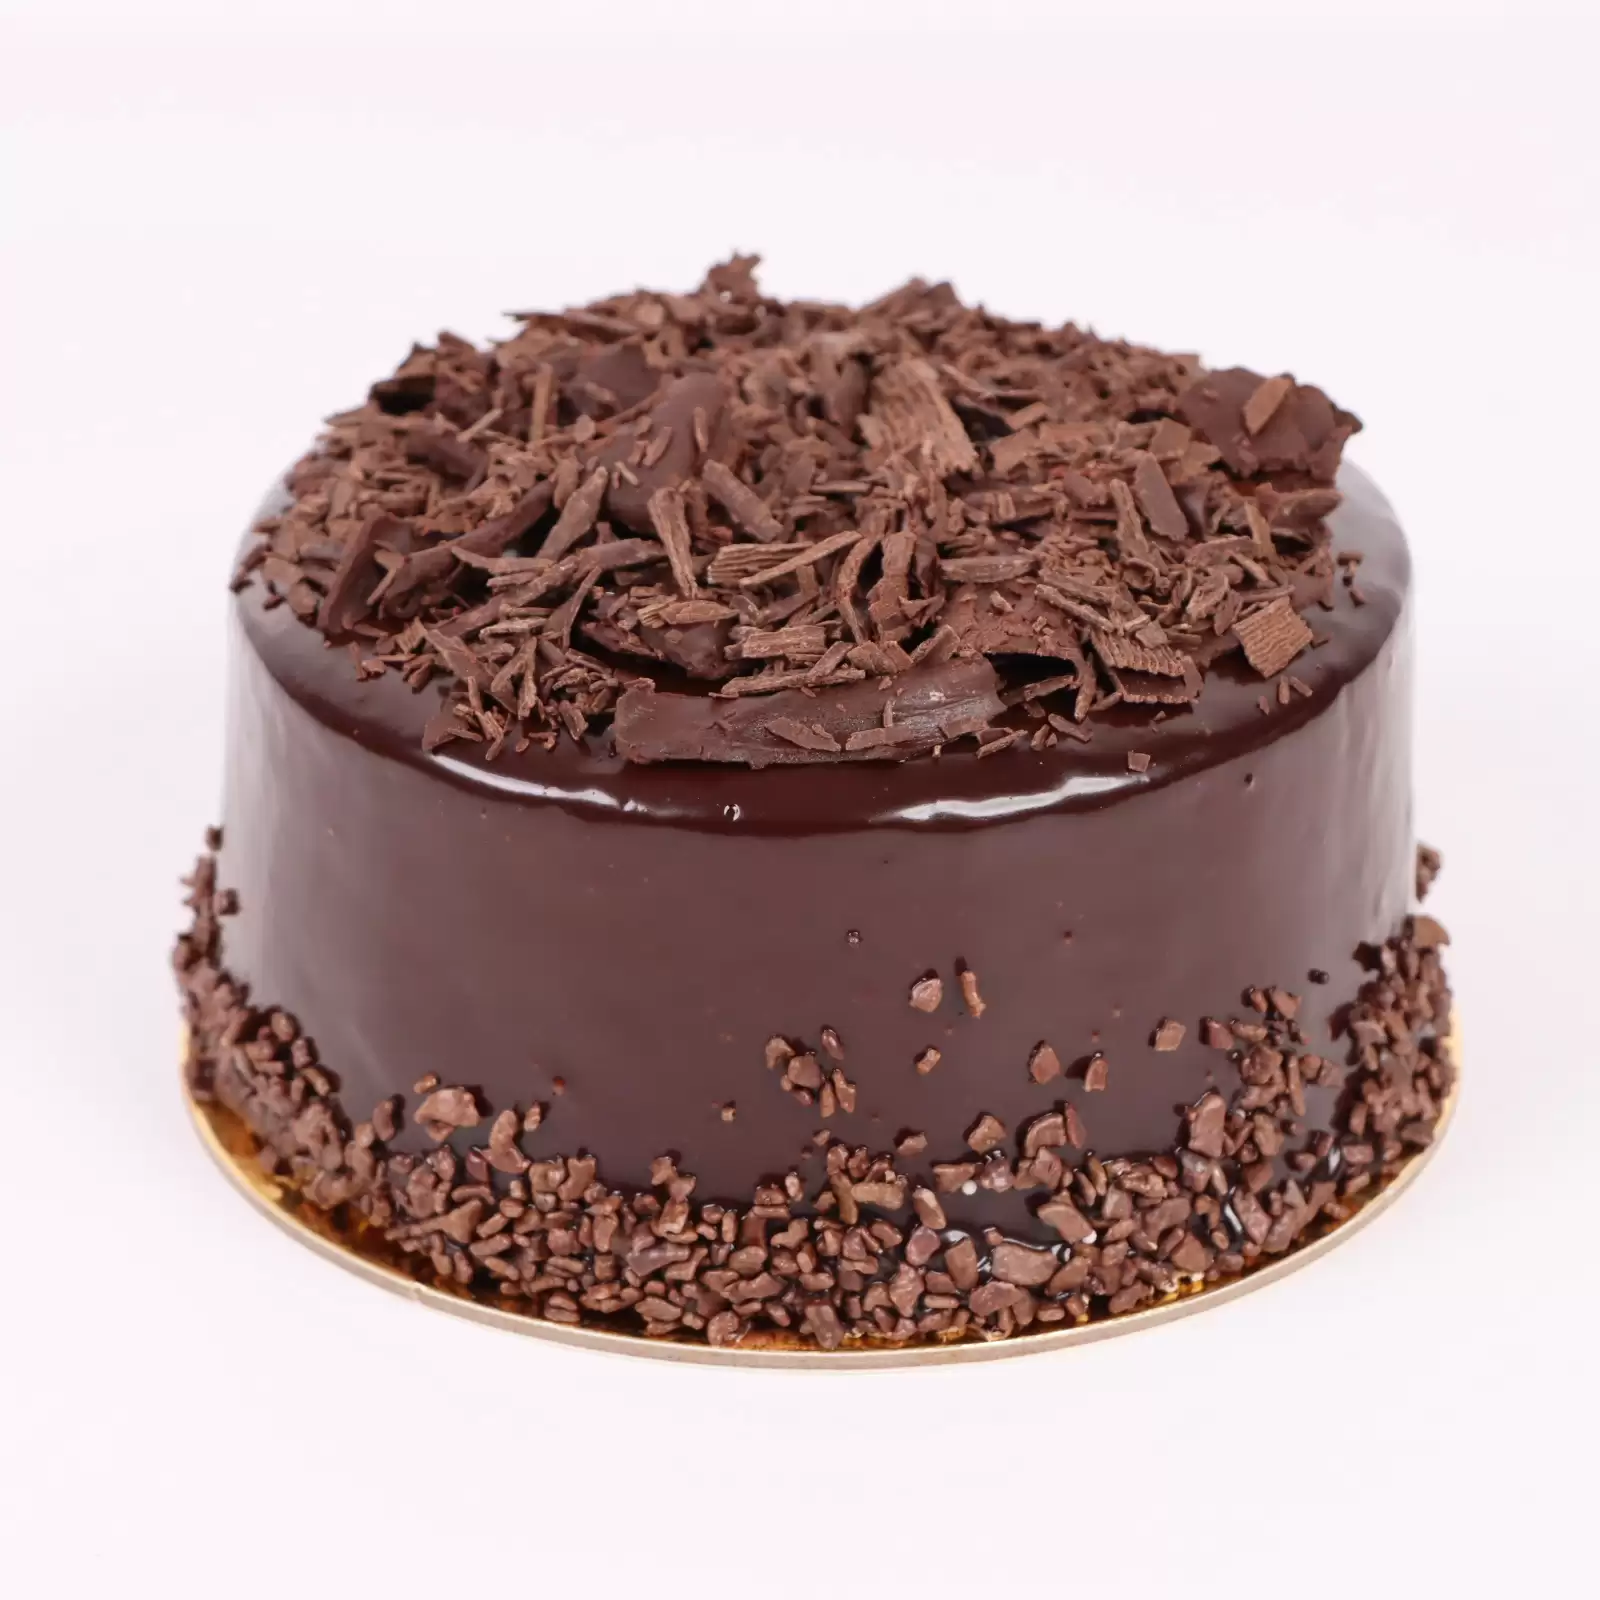 Buy/Send Chocolate Truffle Cake Online | Cakes Delivery In Bahrain - Flora D'lite